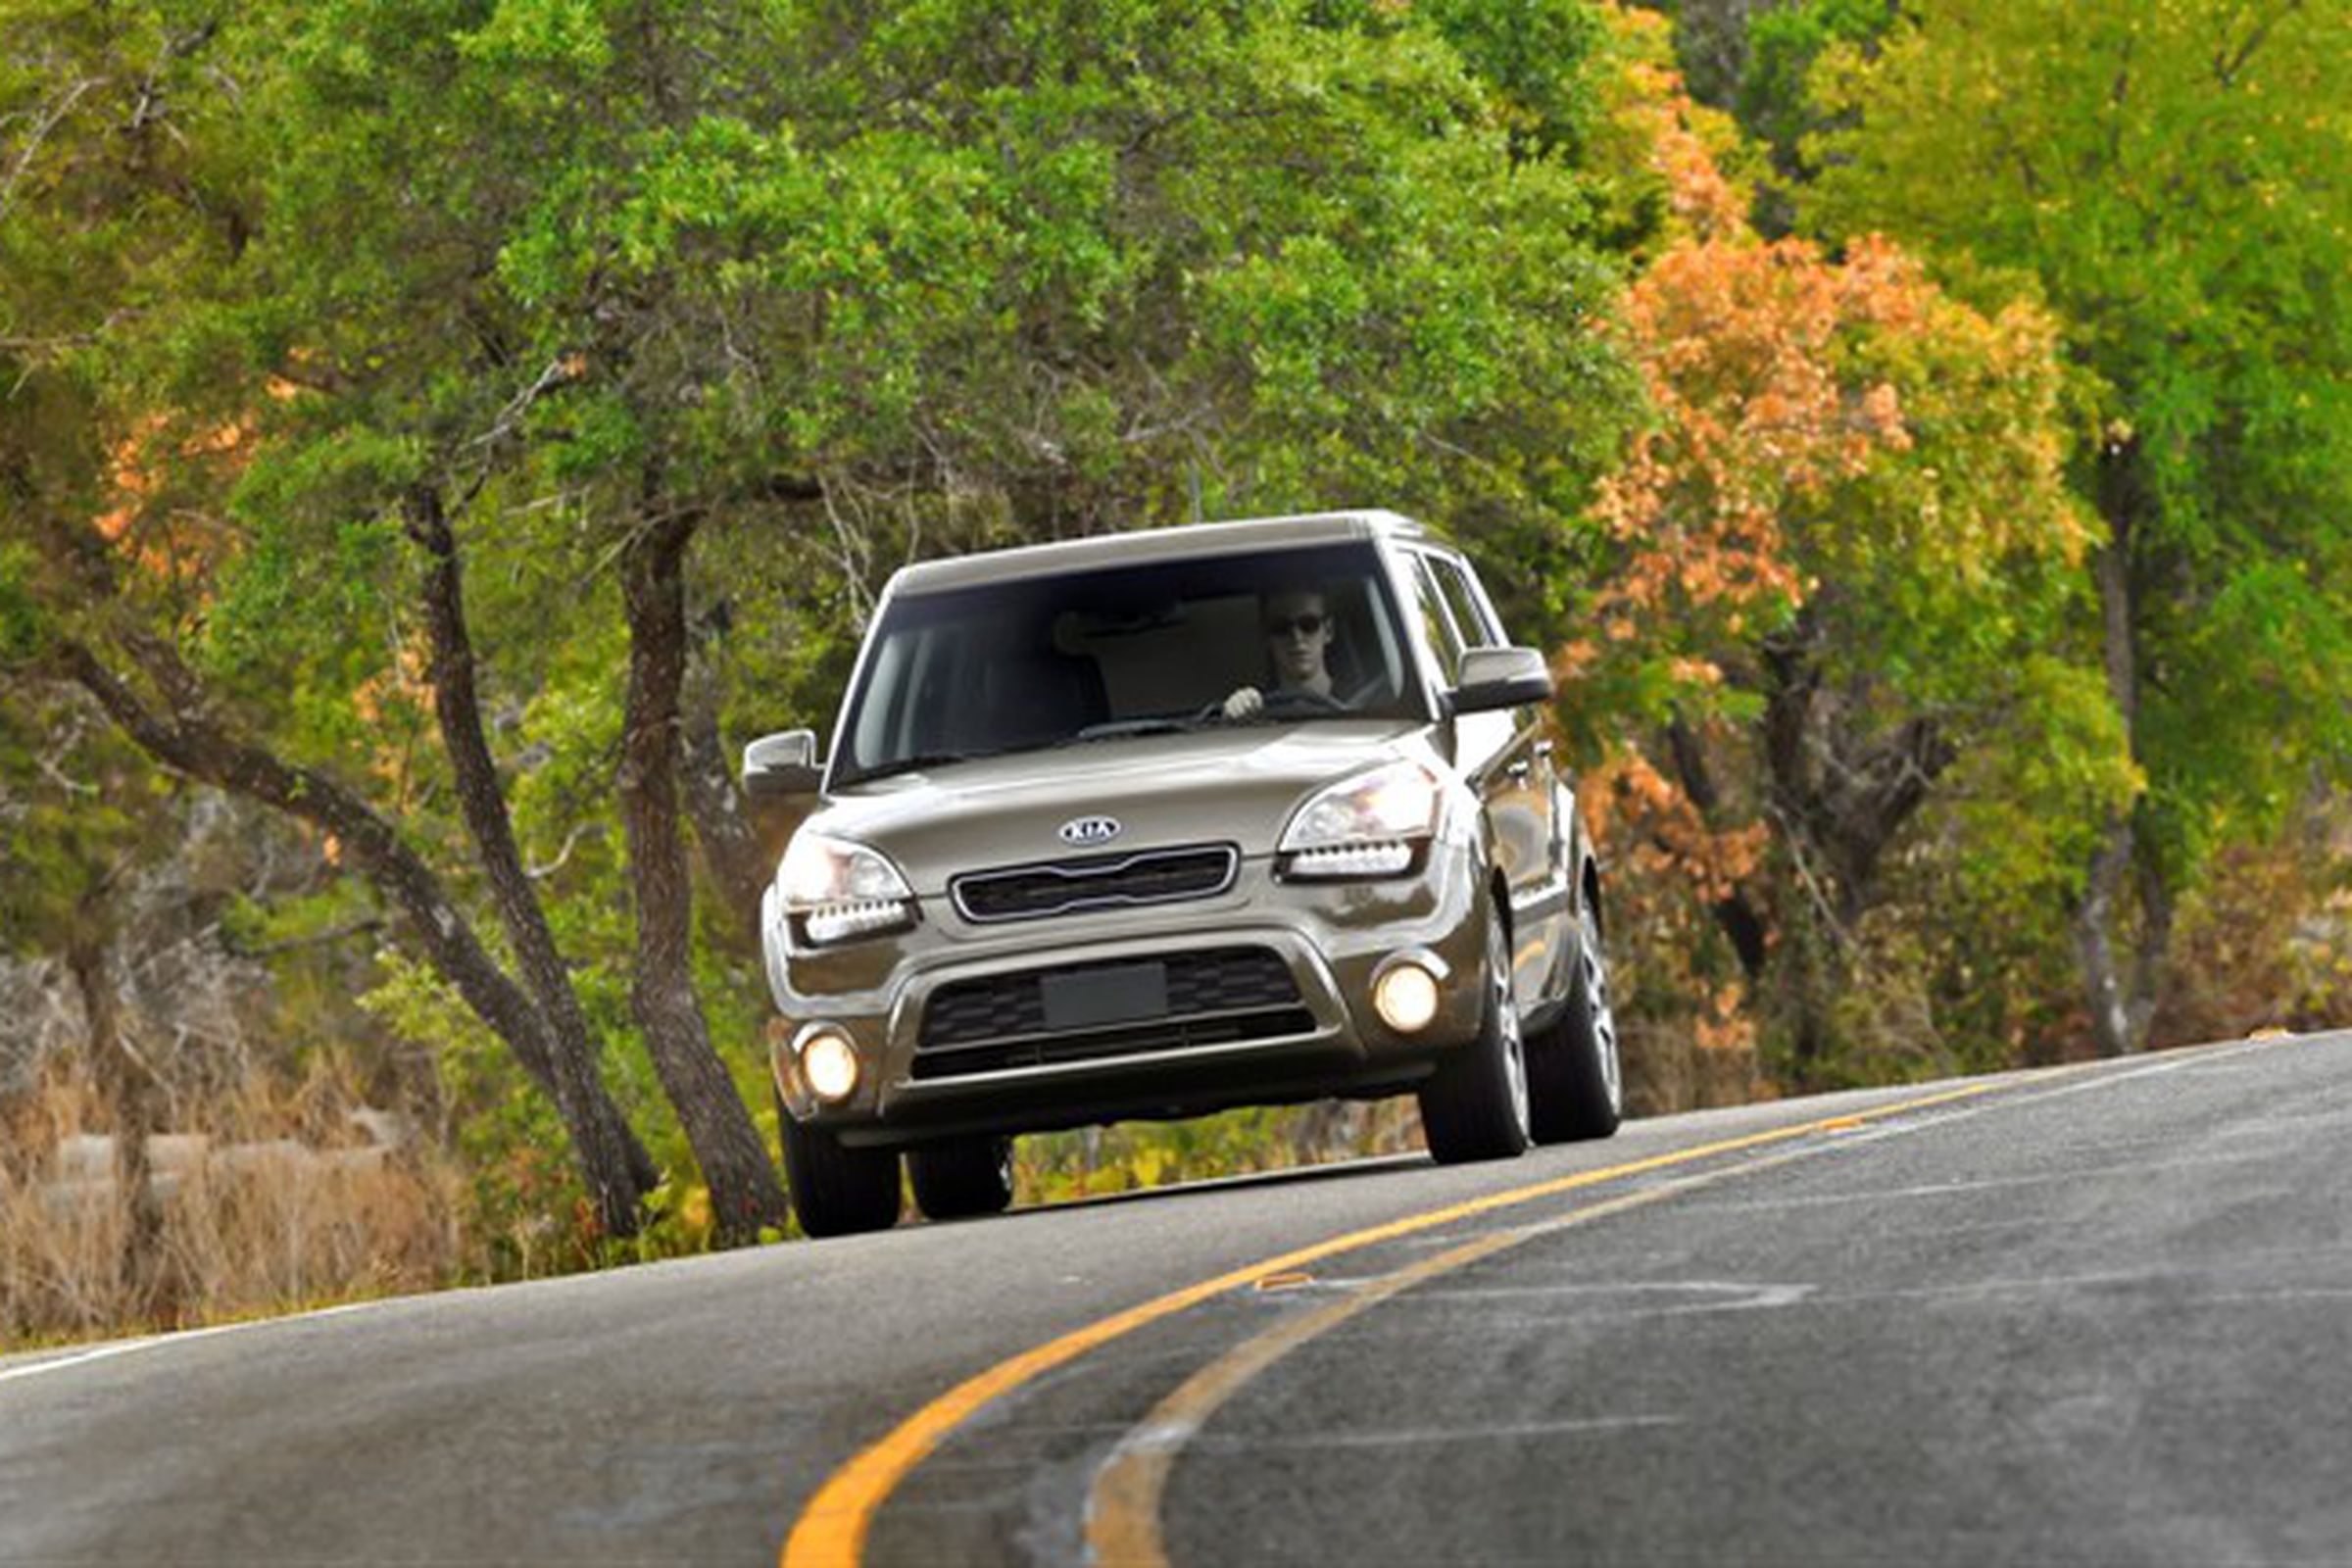 2013 Kia Soul, one of the models cited for underestimating emissions and gas milage